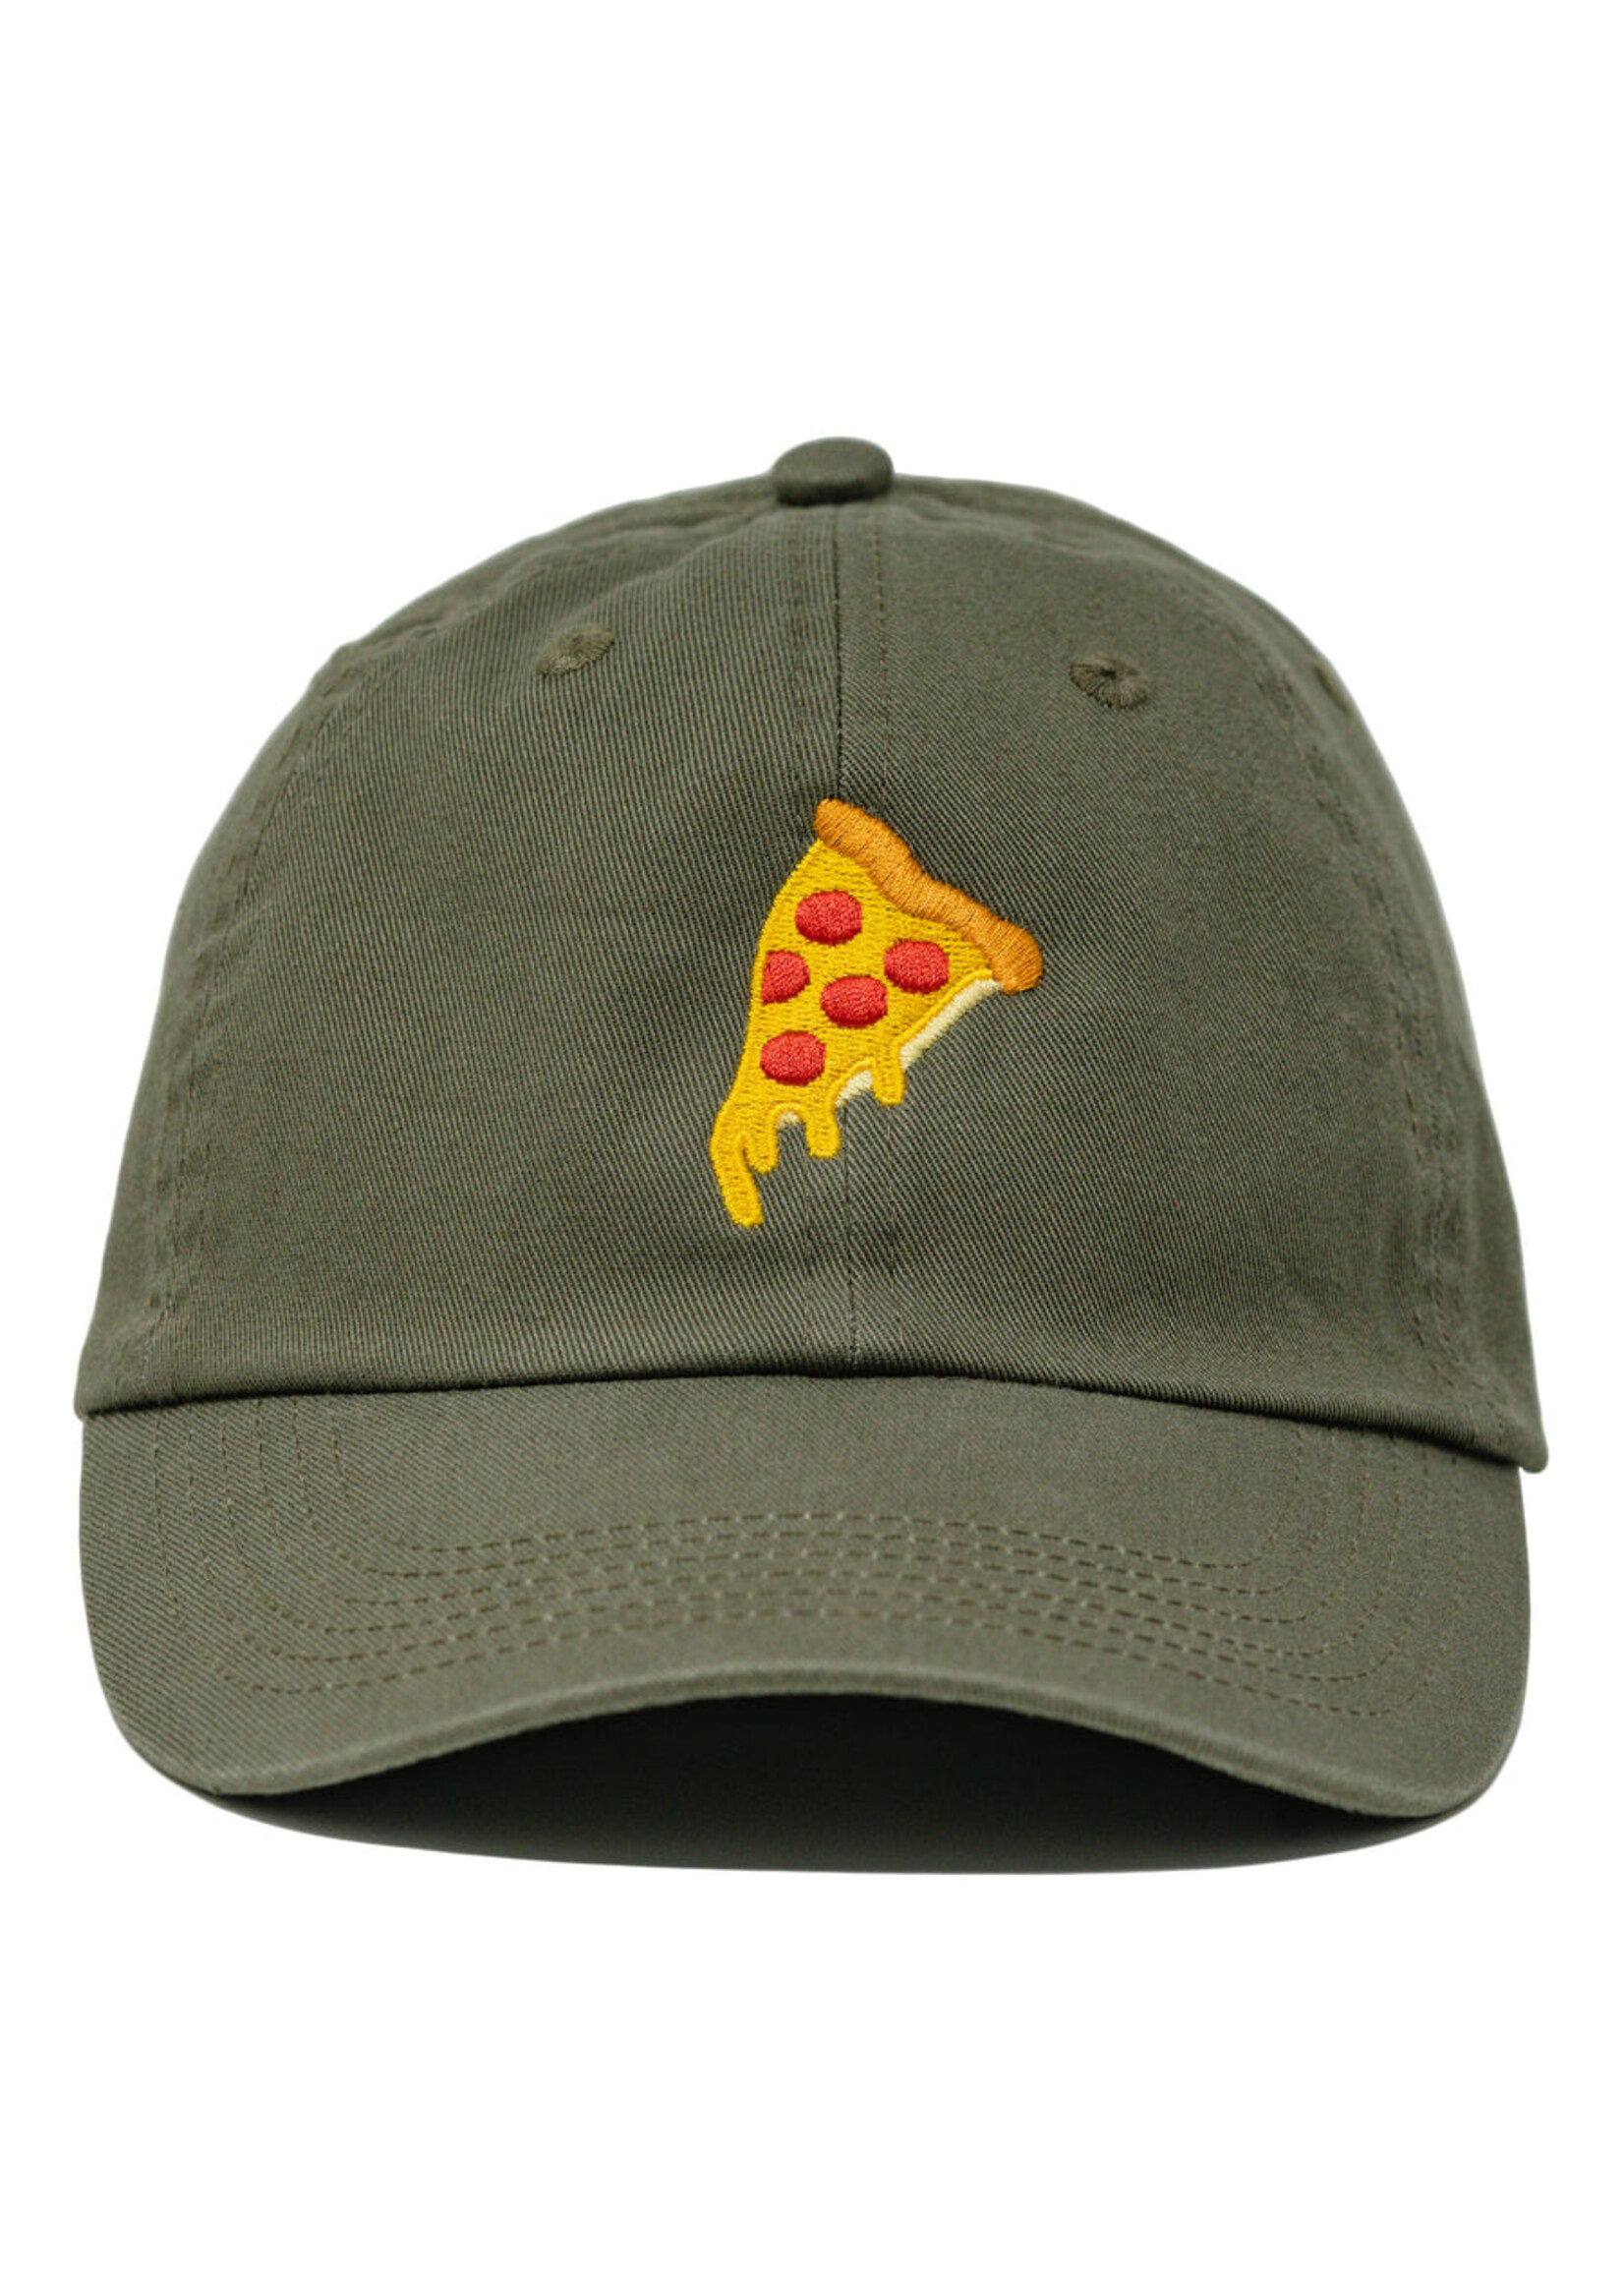 Davenly Pizza Embroidered Hat - Olive